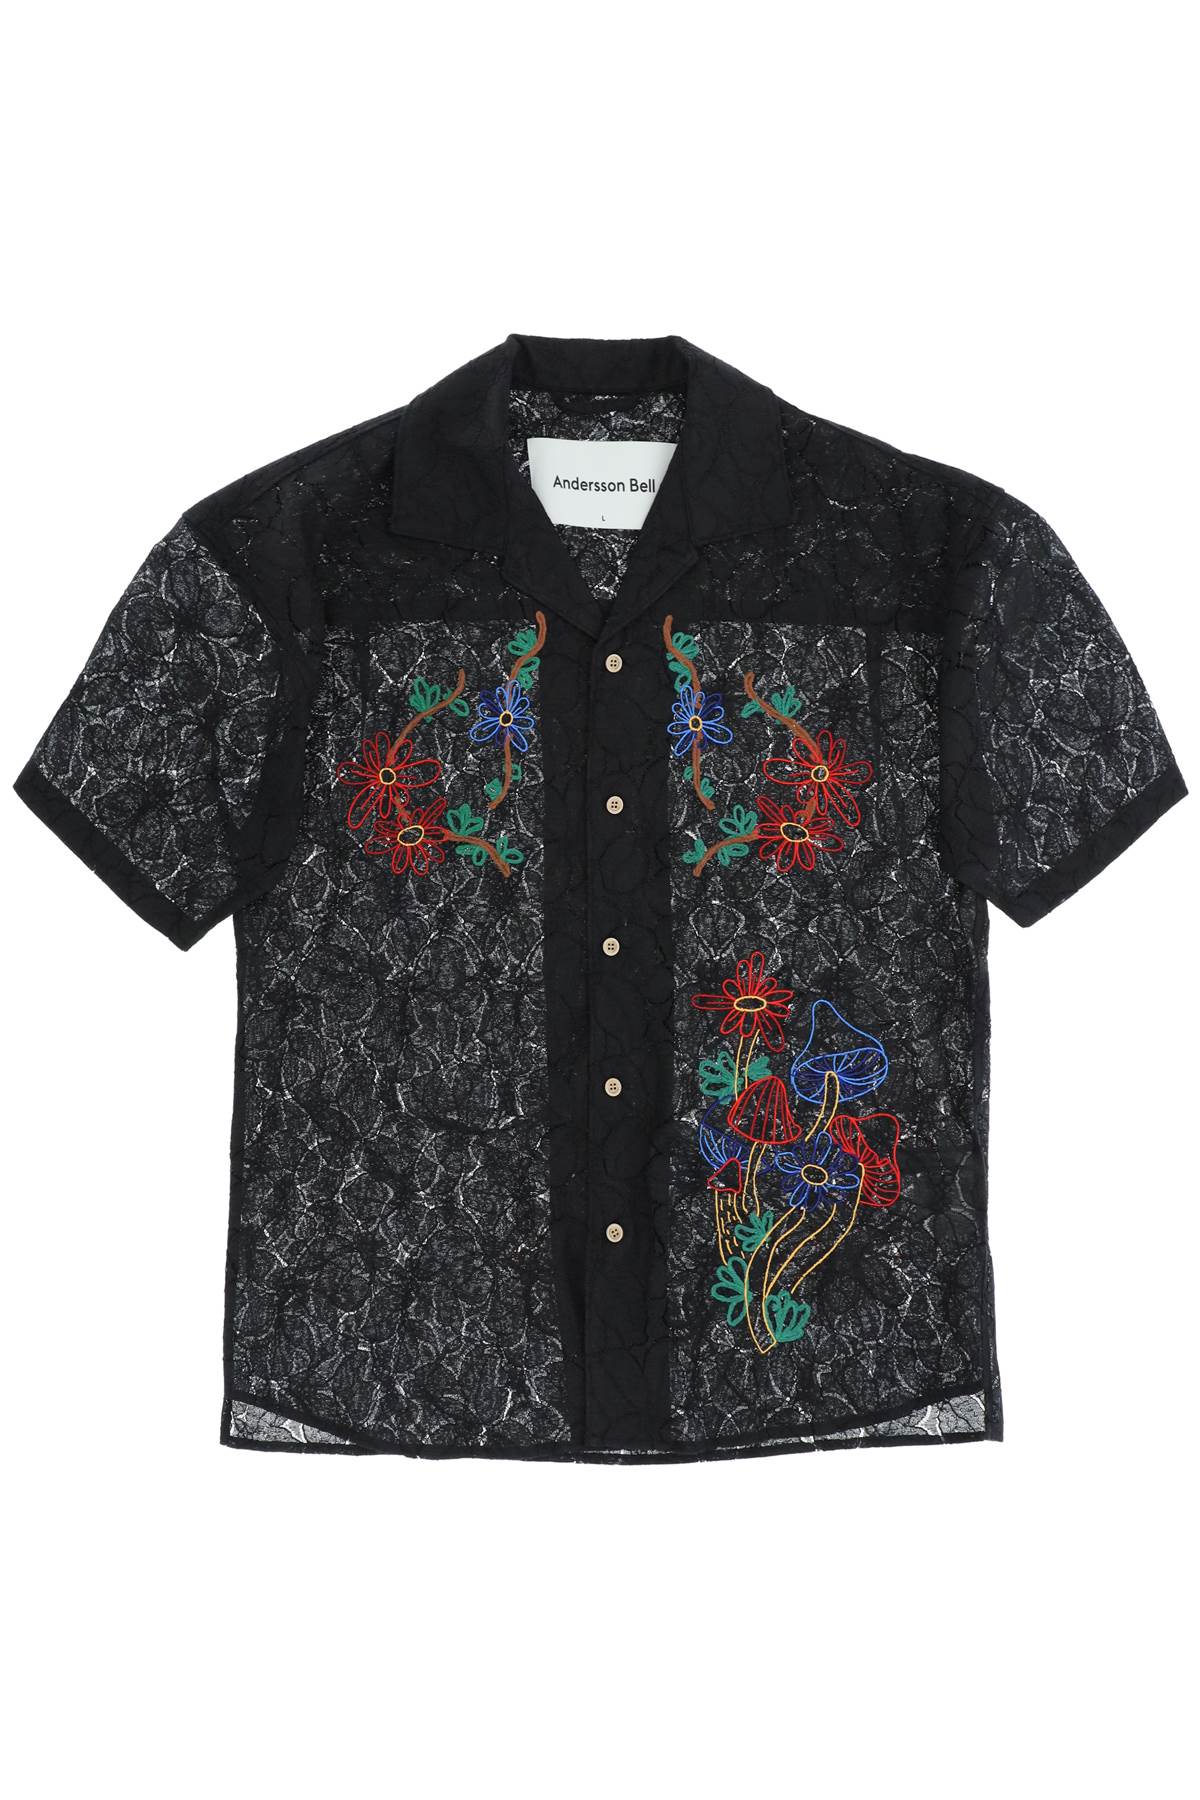 Andersson Bell Lace Shirt Featuring Embroidered Flowers And Mushrooms